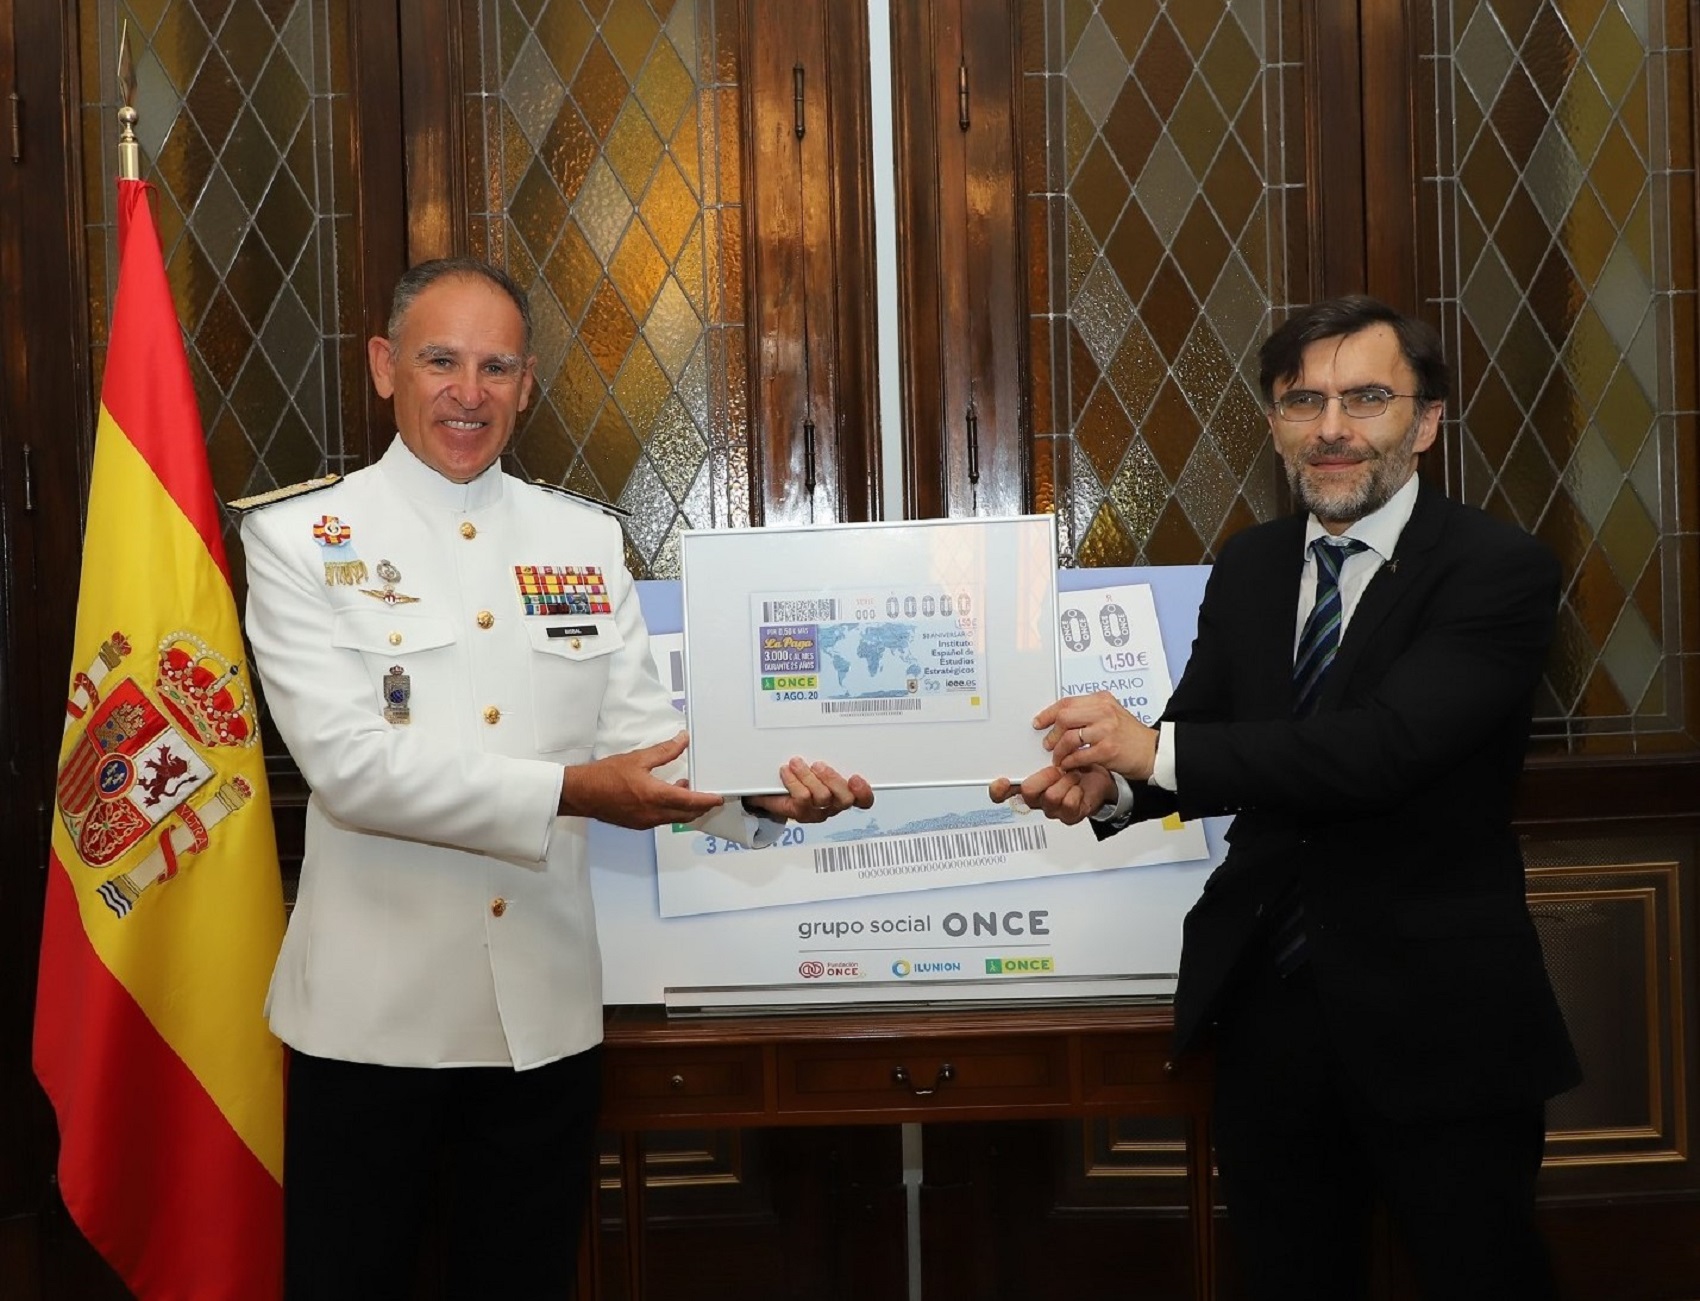 ONCE´s lottery conmemorates the 50th aniversary of the spanish Institute for Strategic Studies